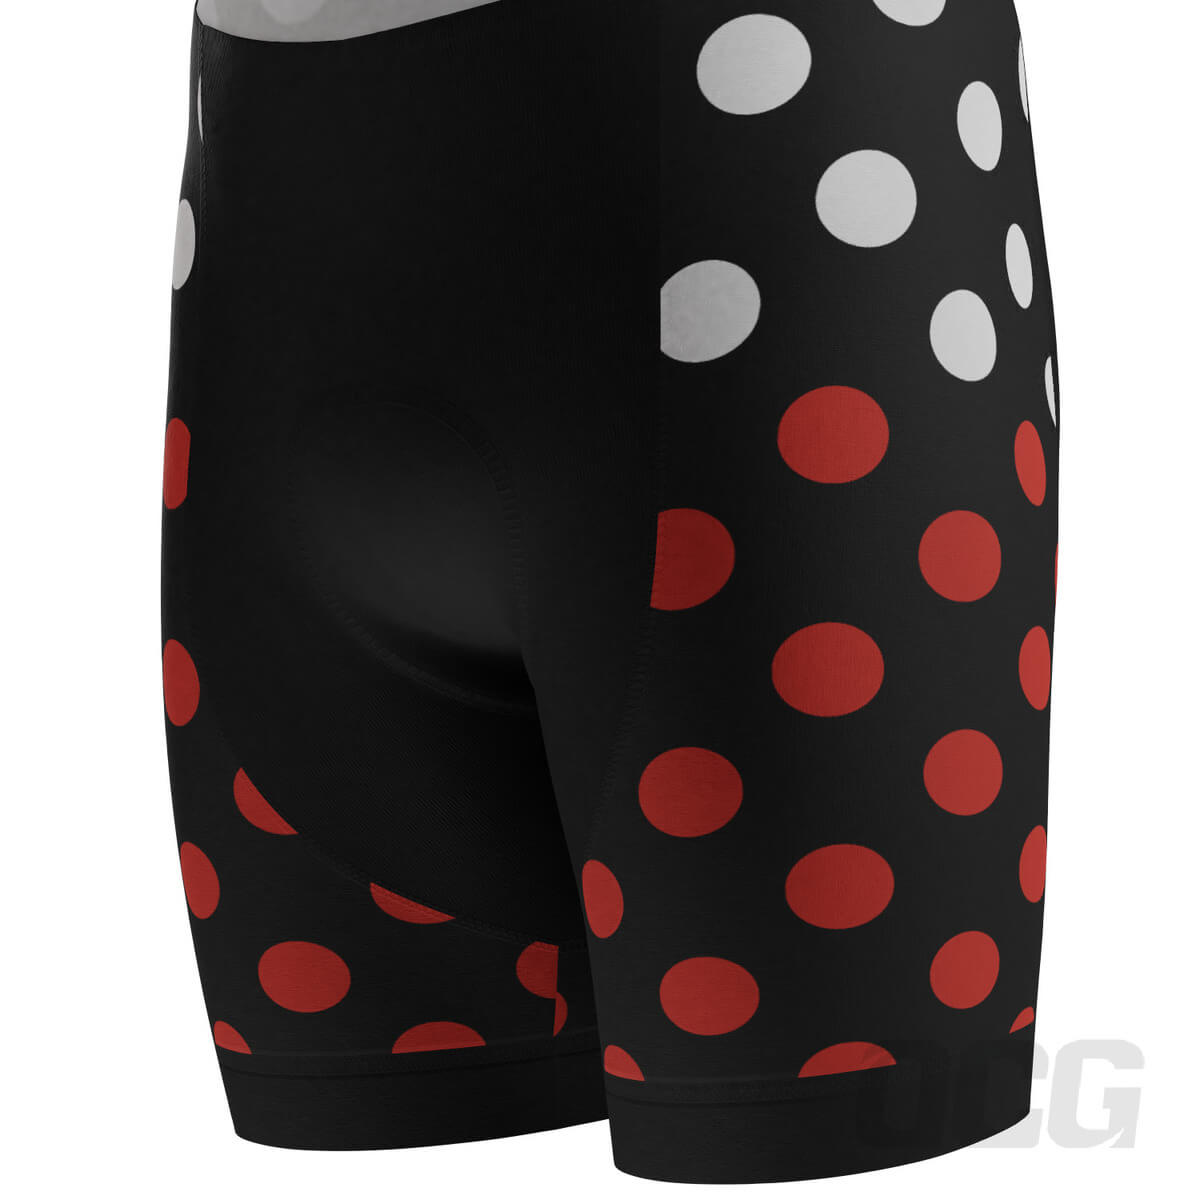 Men's Red Polka Dots on White 2 Piece Cycling Kit